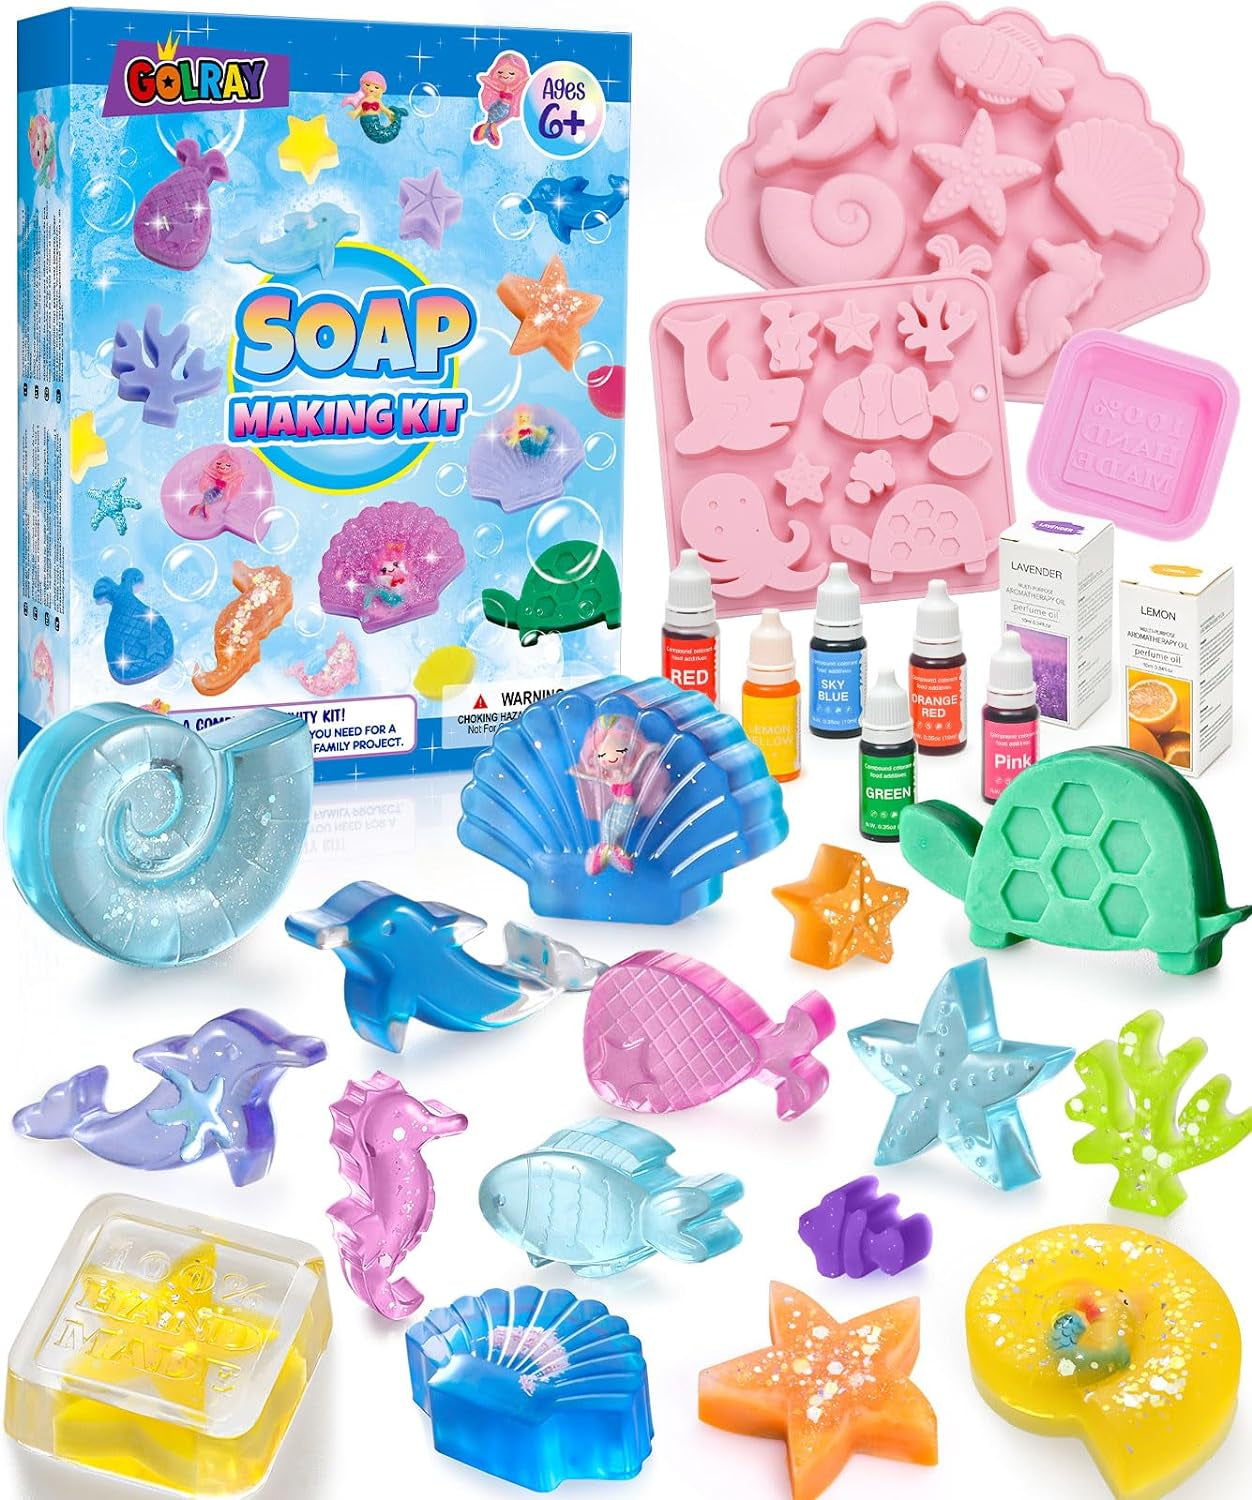 Mermaid Soap Making Craft Kit Kids Toy, 18 Model, 6 Ink, 2 Essential Oil Supply, Art and Craft for Kid Girl Age 8-12 Year Old Ocean Animal Toy Birthday Gift, DIY Science Kits (Create 16+Pcs)